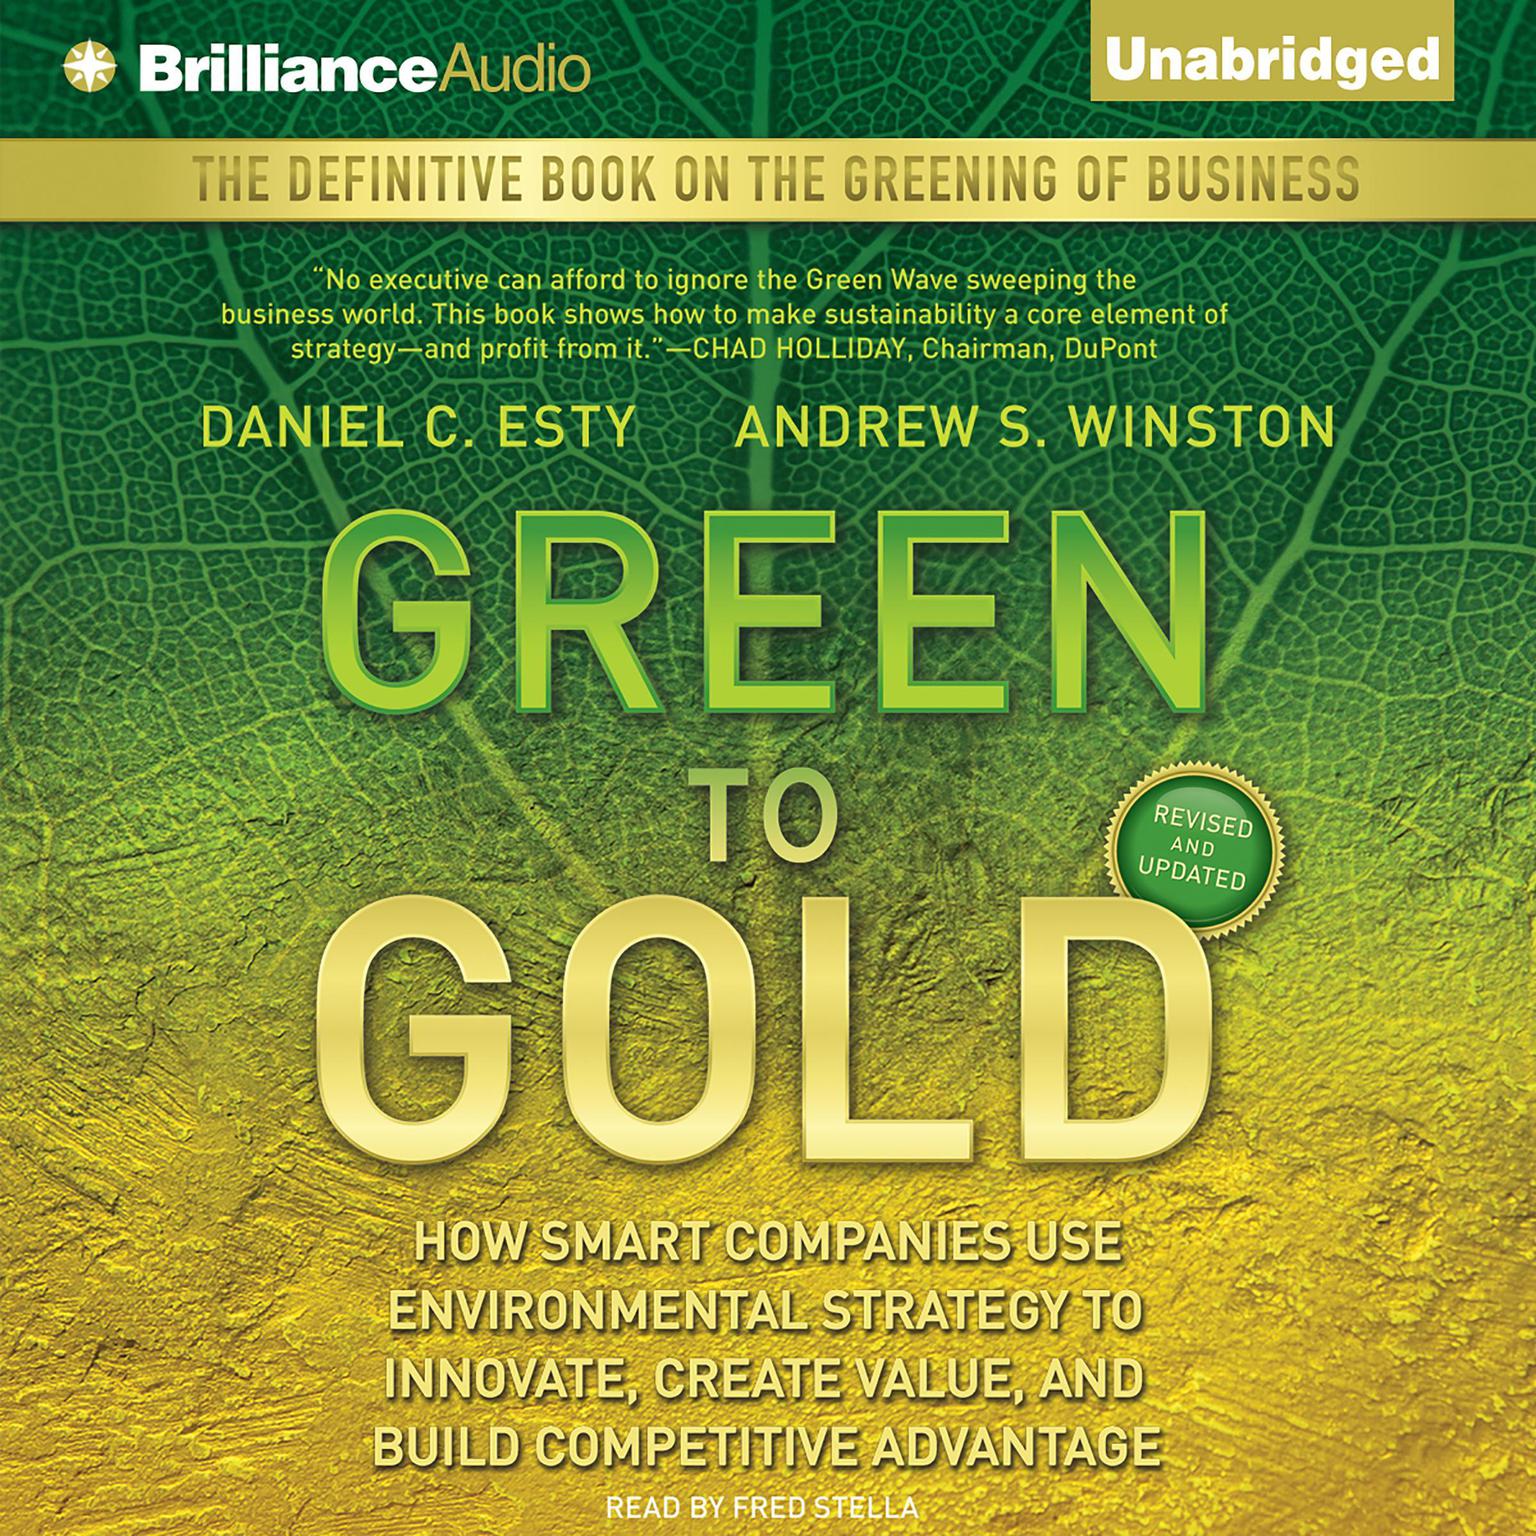 Green to Gold: How Smart Companies Use Environmental Strategy to Innovate, Create Value, and Build Competitive Advantage Audiobook, by Daniel C. Esty